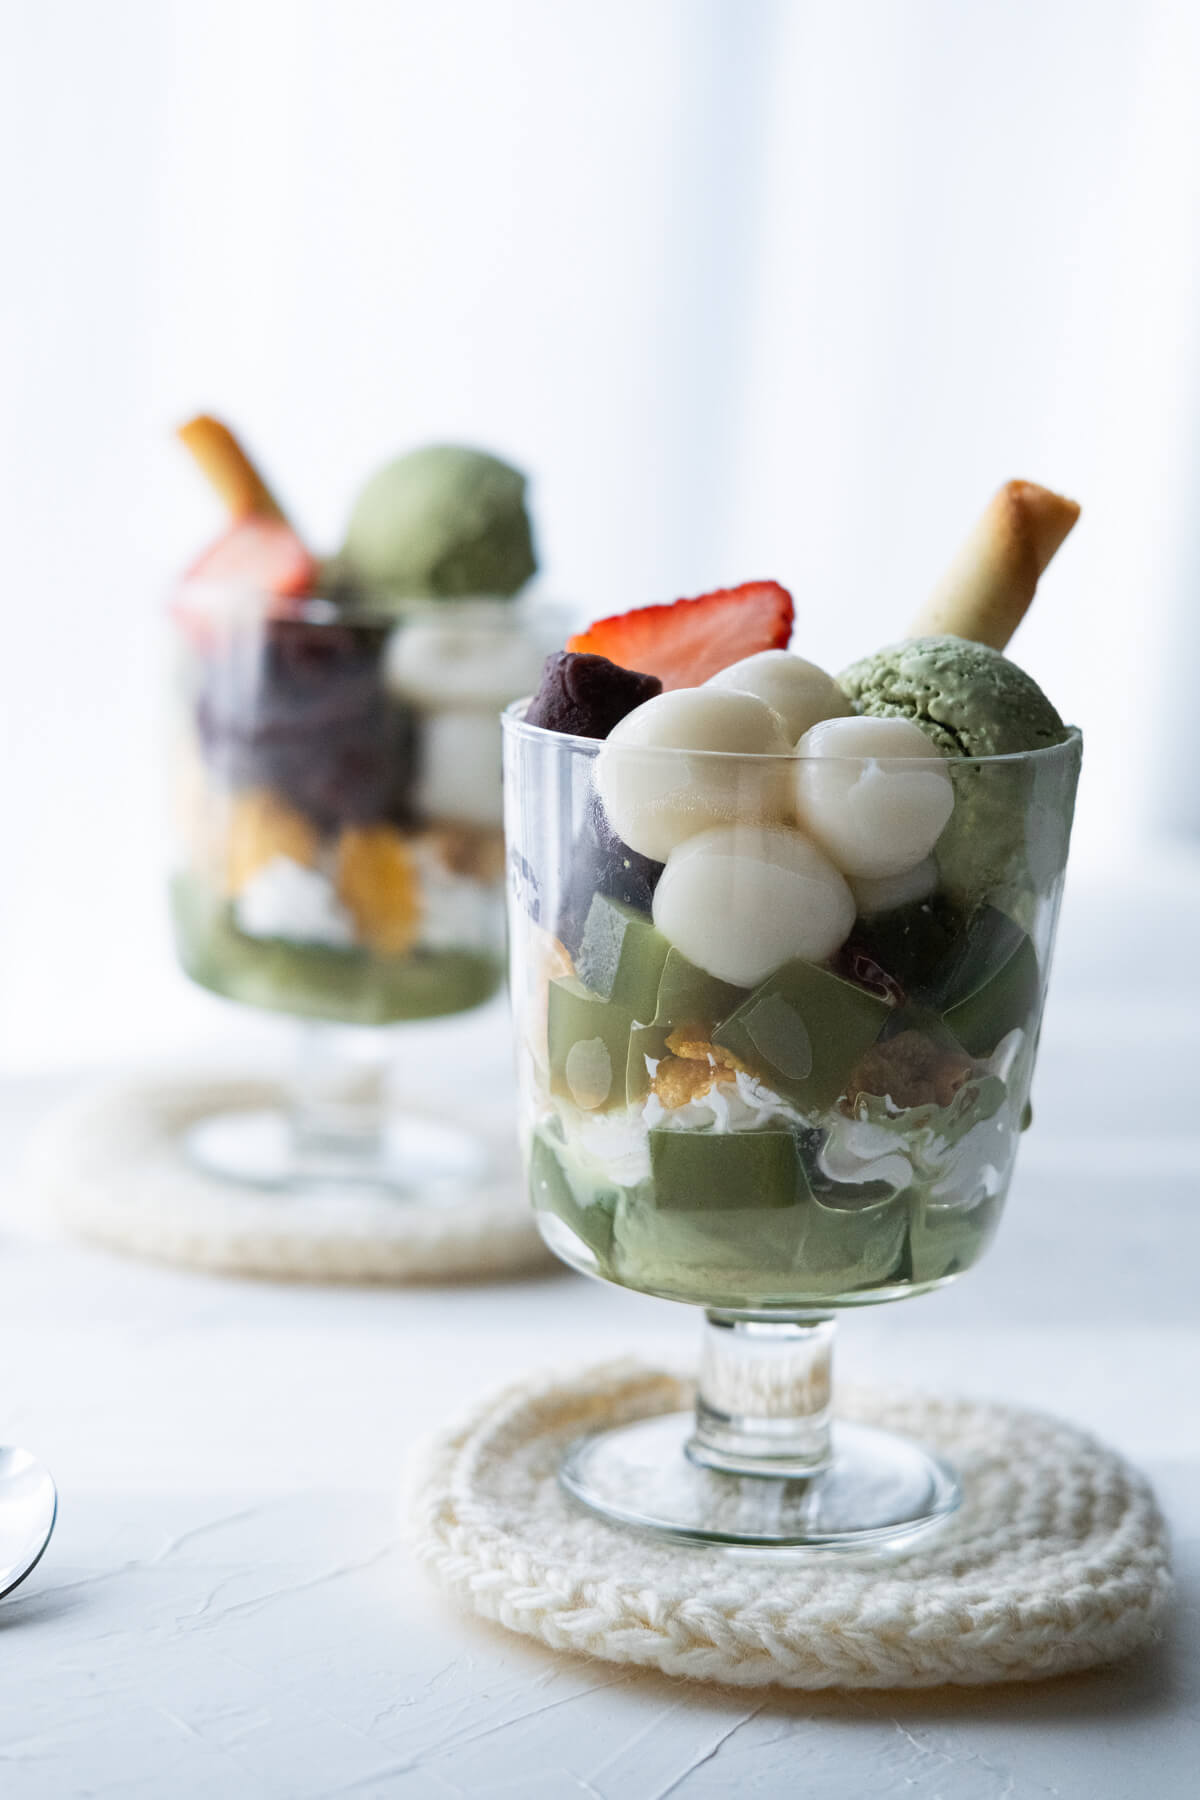 The layers of matcha parfait shows cleanly throughout the glass cup. 